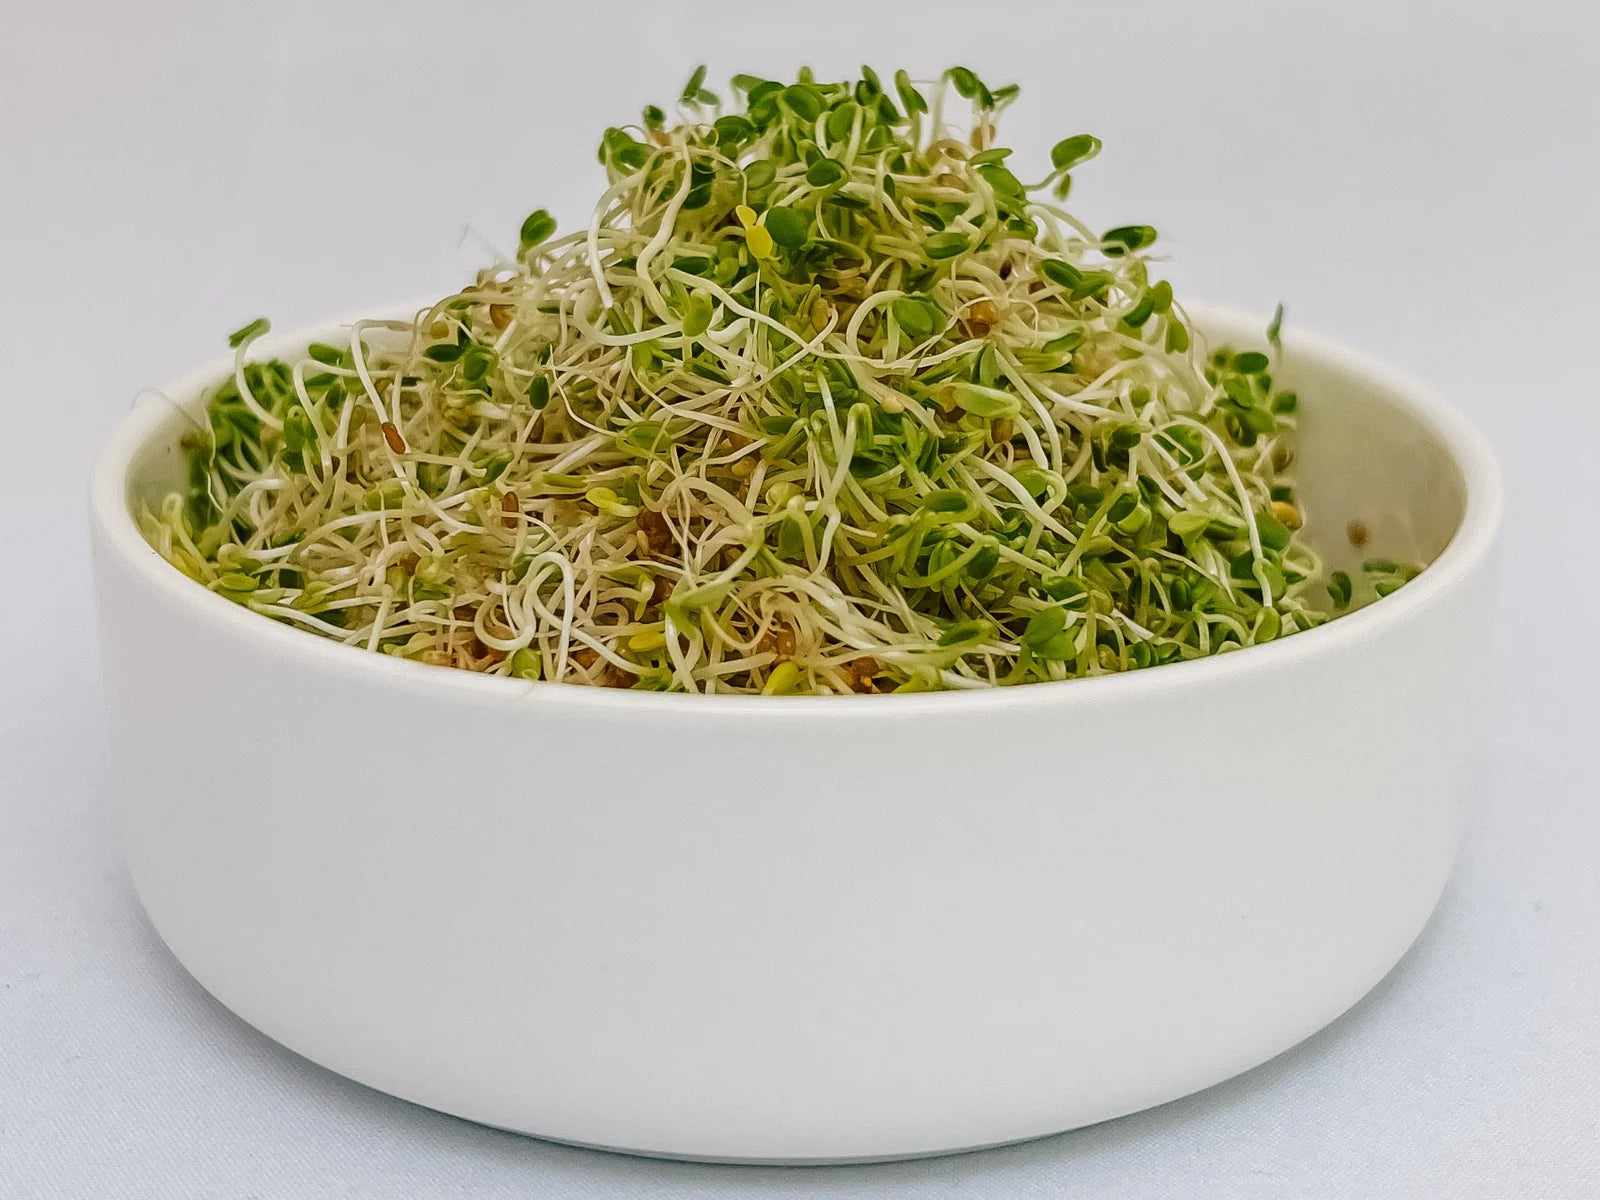 Clover Sprouts in a Bowl